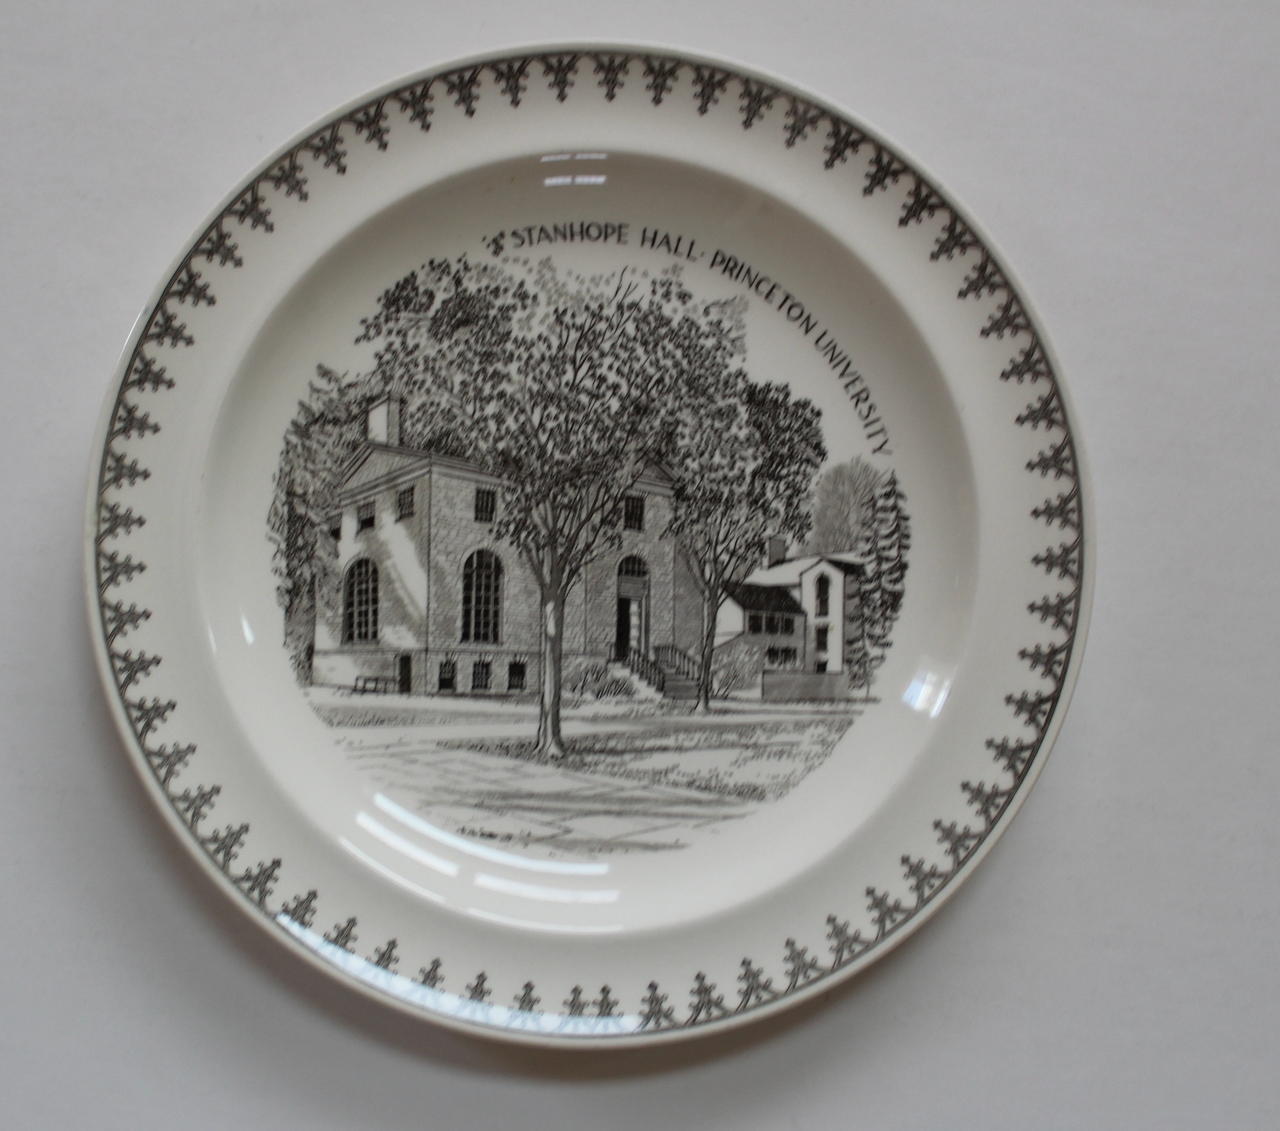 Stanhope Hall Princeton Wedgwood Plate - Collectible Ivy